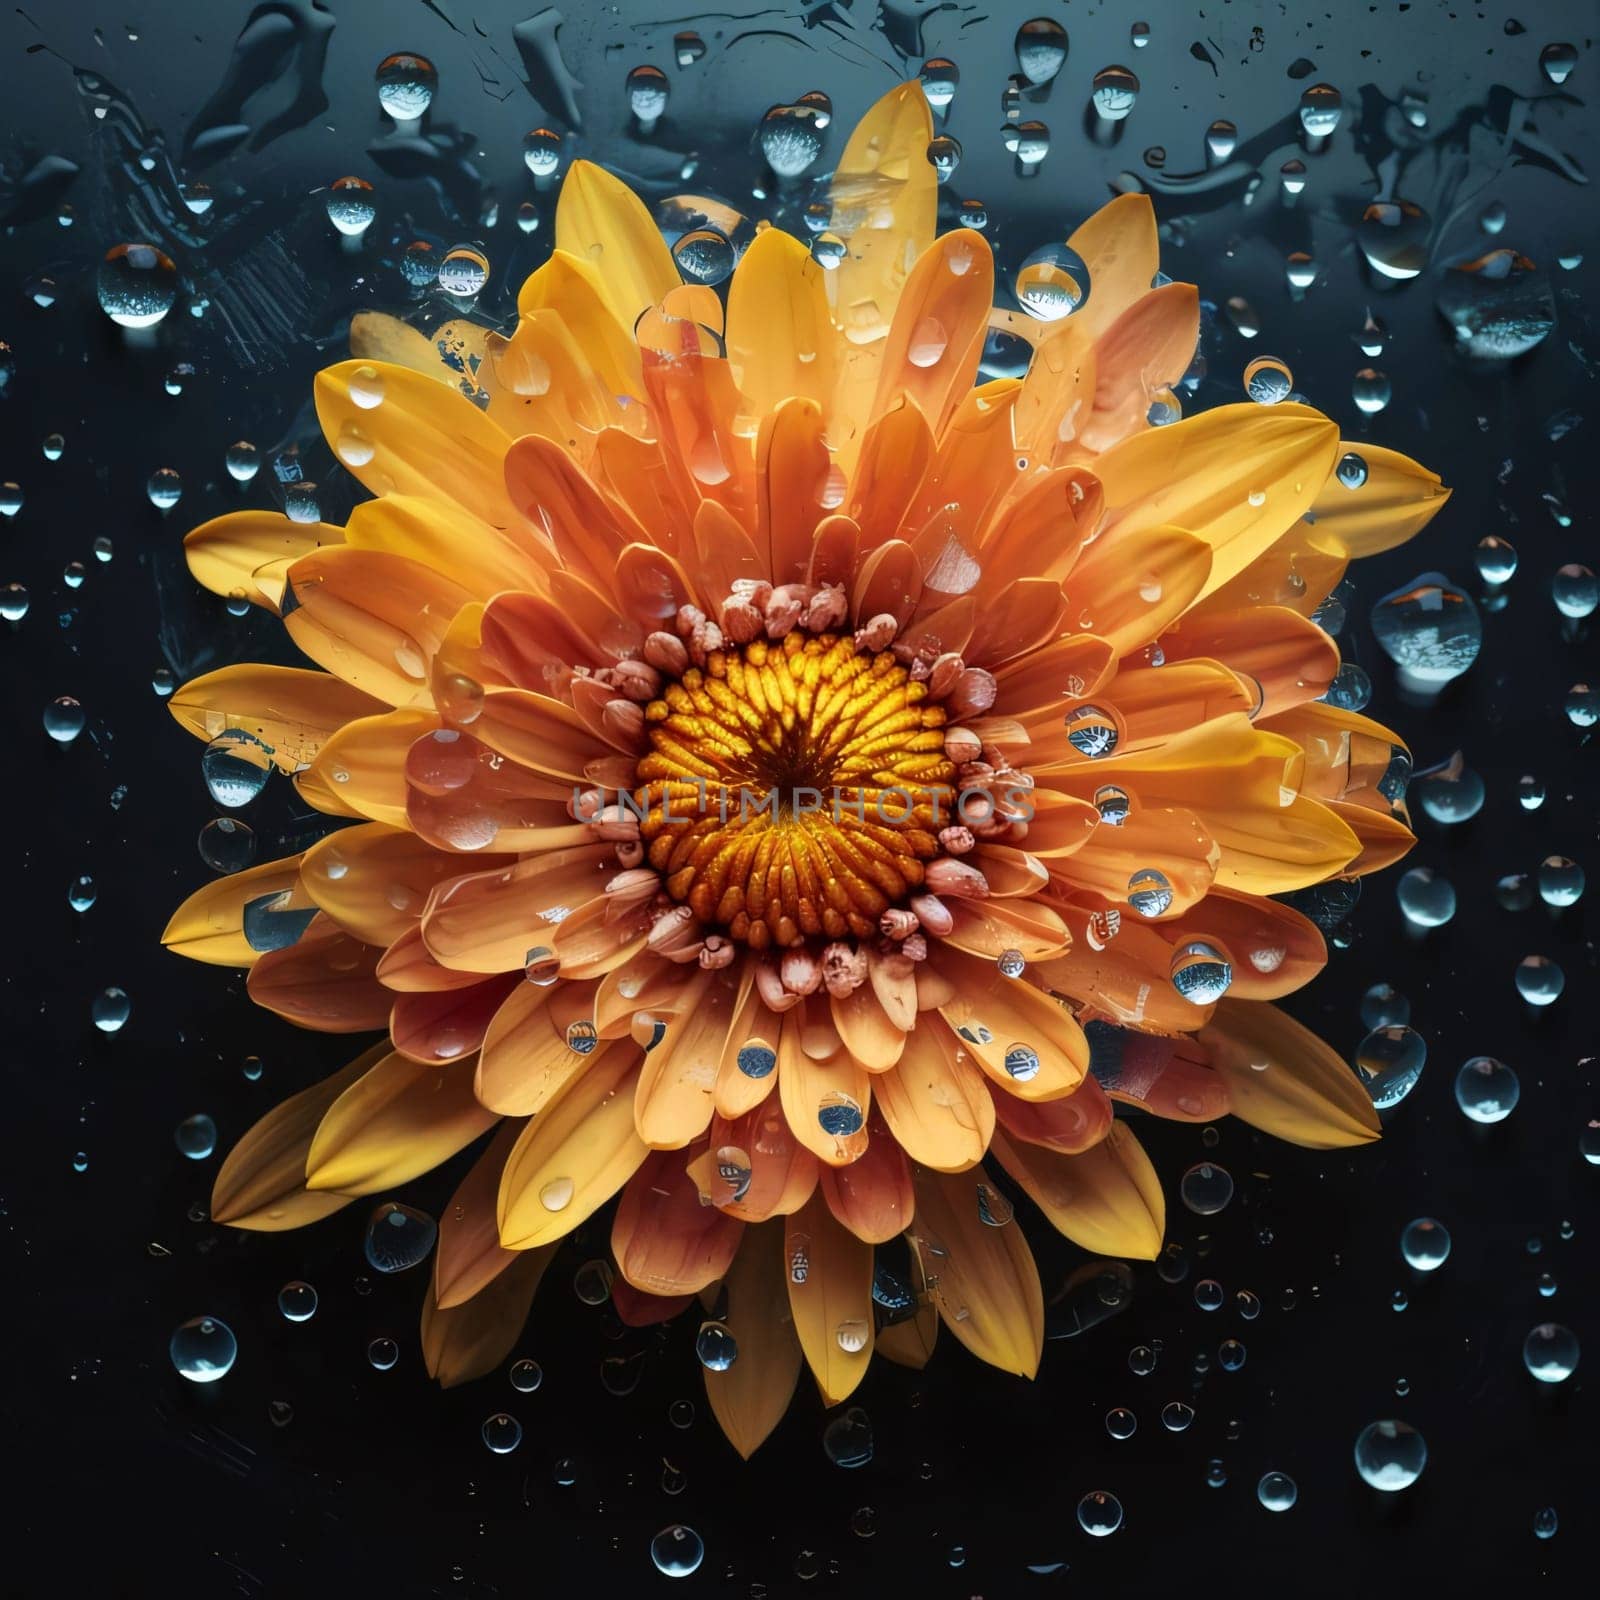 Top view of orange flower with raindrops, dew, water. Flowering flowers, a symbol of spring, new life. A joyful time of nature waking up to life.